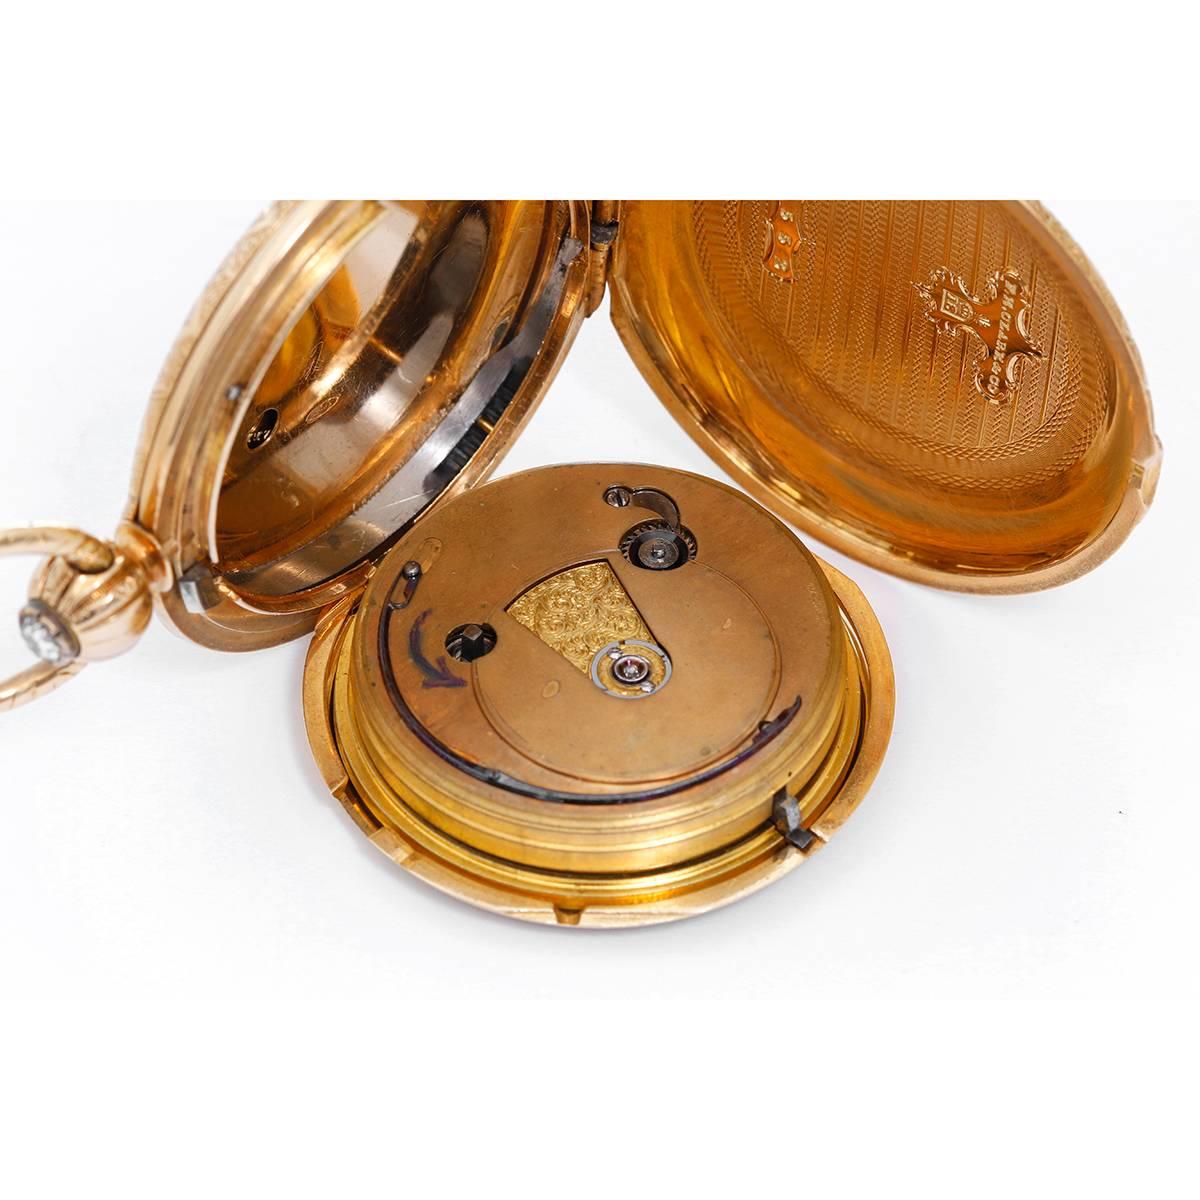 F. H. Clark & Co. 18K Yellow Gold Pocket Watch -  Key winding. 18K Yellow Gold Hunting case (56mm) with geometrical engraving.. White enamel dial with Roman numerals; Sub seconds at 6:00 o' clock. Pre-owned with box. The front of the Hunting case